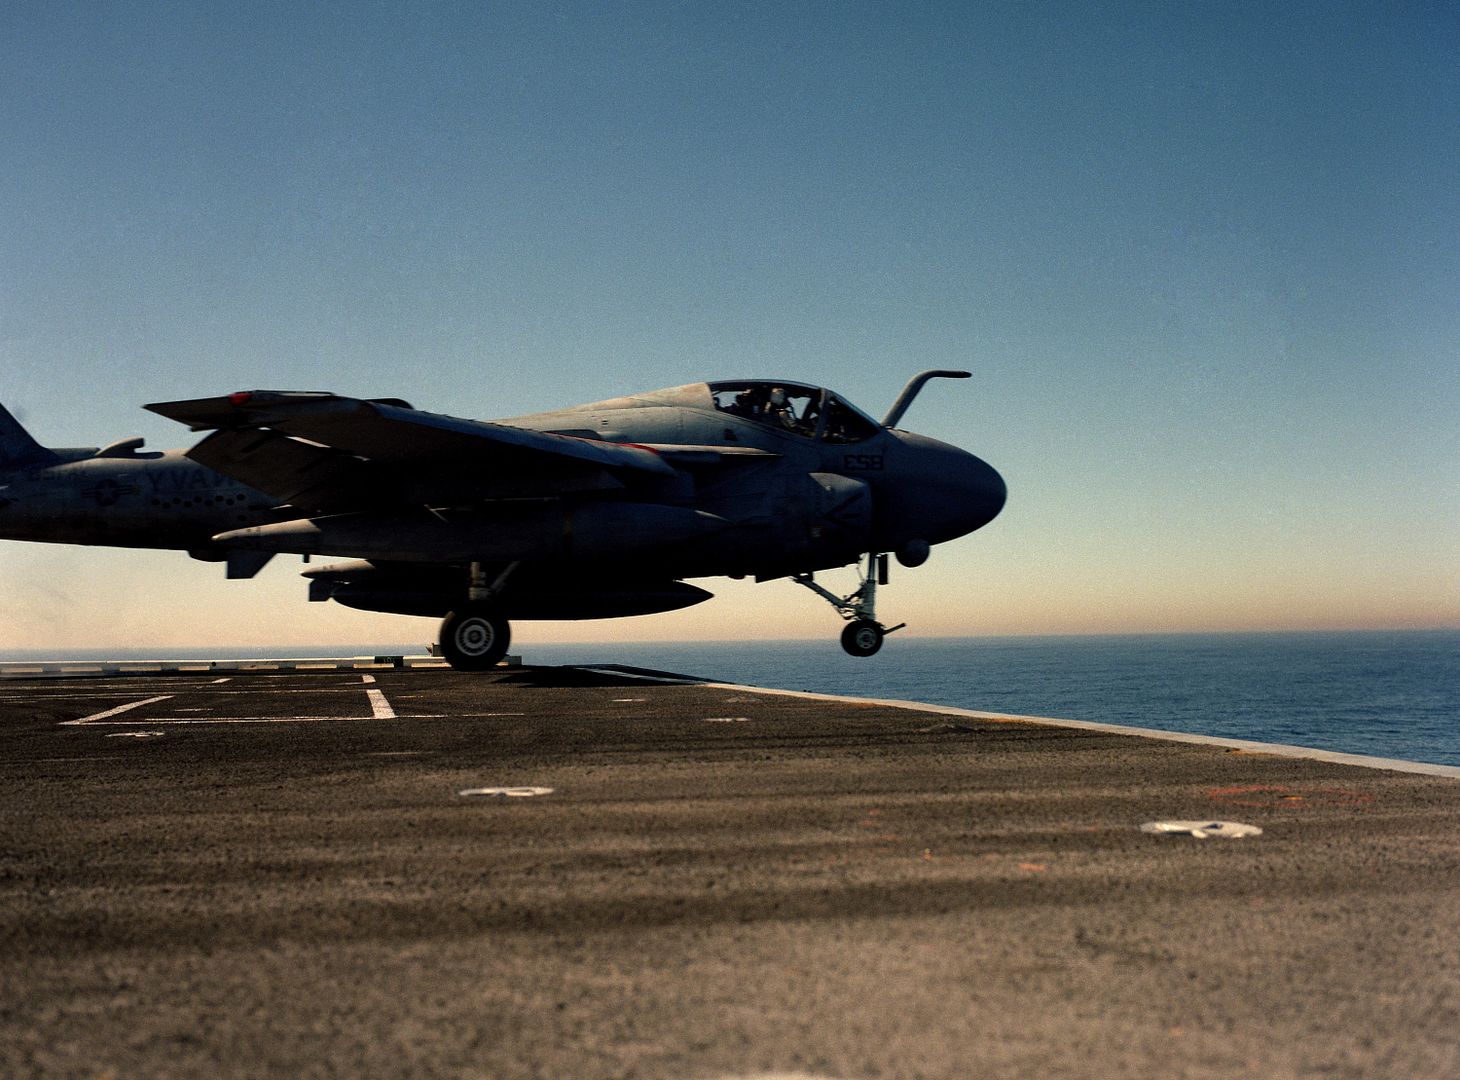 An A 6E Intruder Aircraft Is Launched From The Nuclear Powered Aircraft Carrier USS CARL VINSON 